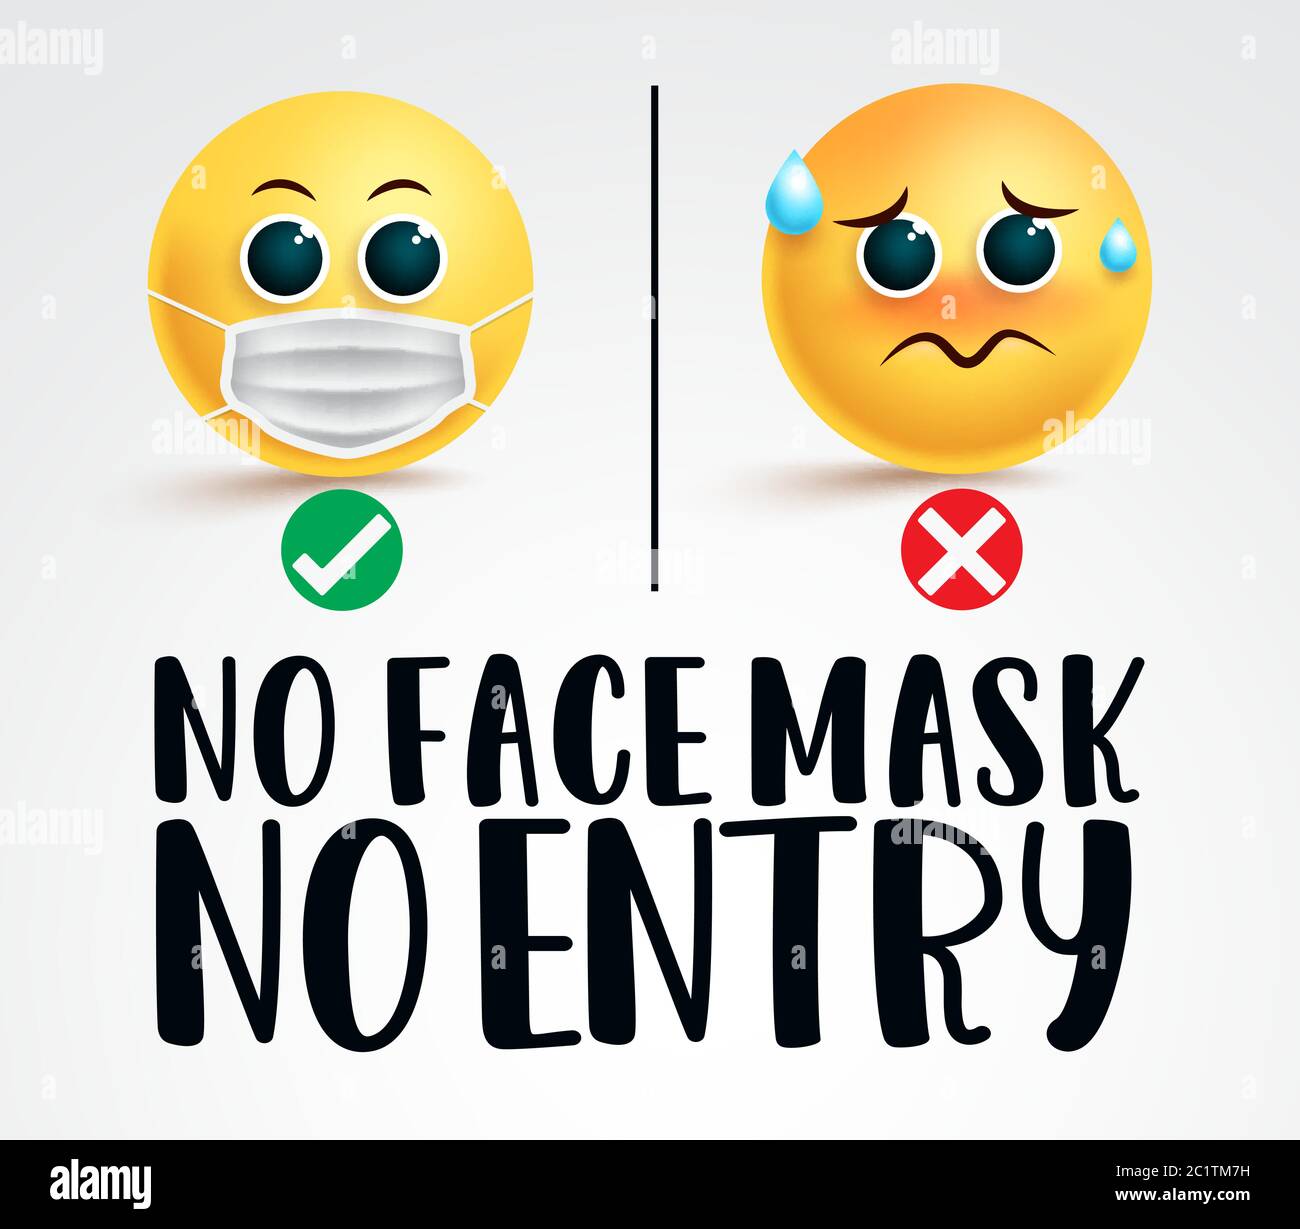 Smiley face mask signage vector design. No face mask no entry text with two emojis wearing and not wearing surgical mask for covid-19 safety. Stock Vector